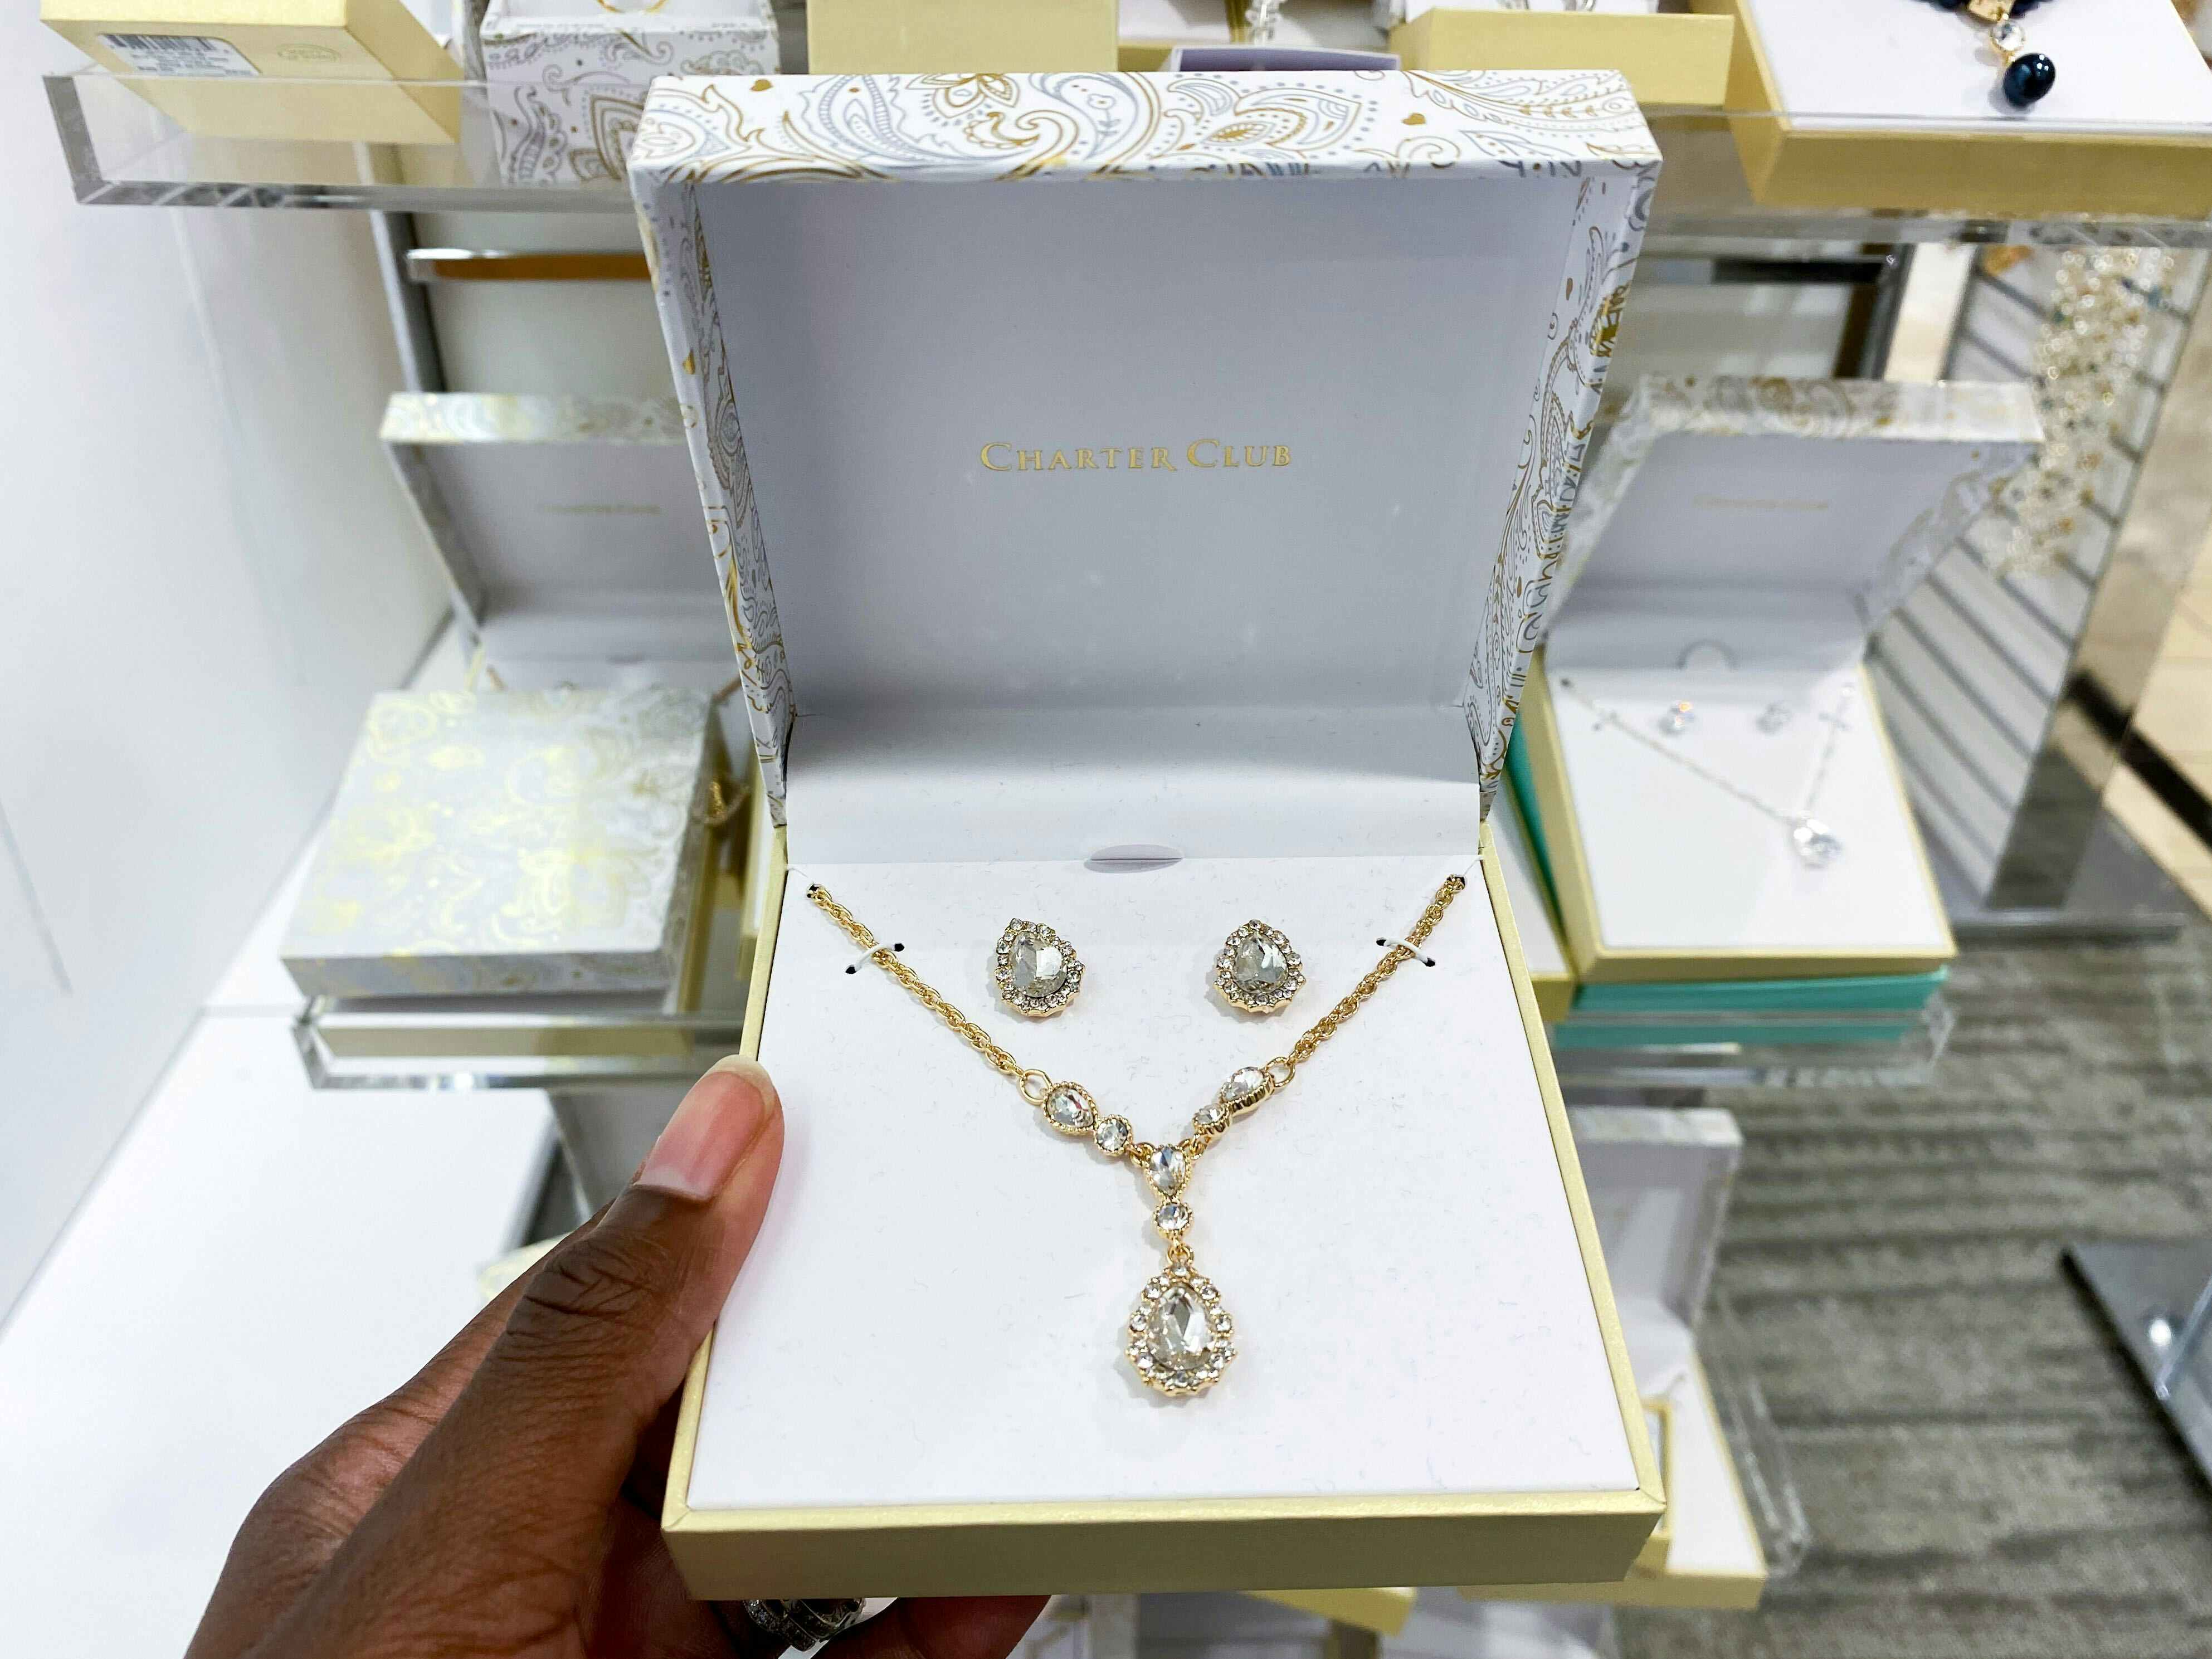 two-piece necklace and earring set at Macy's